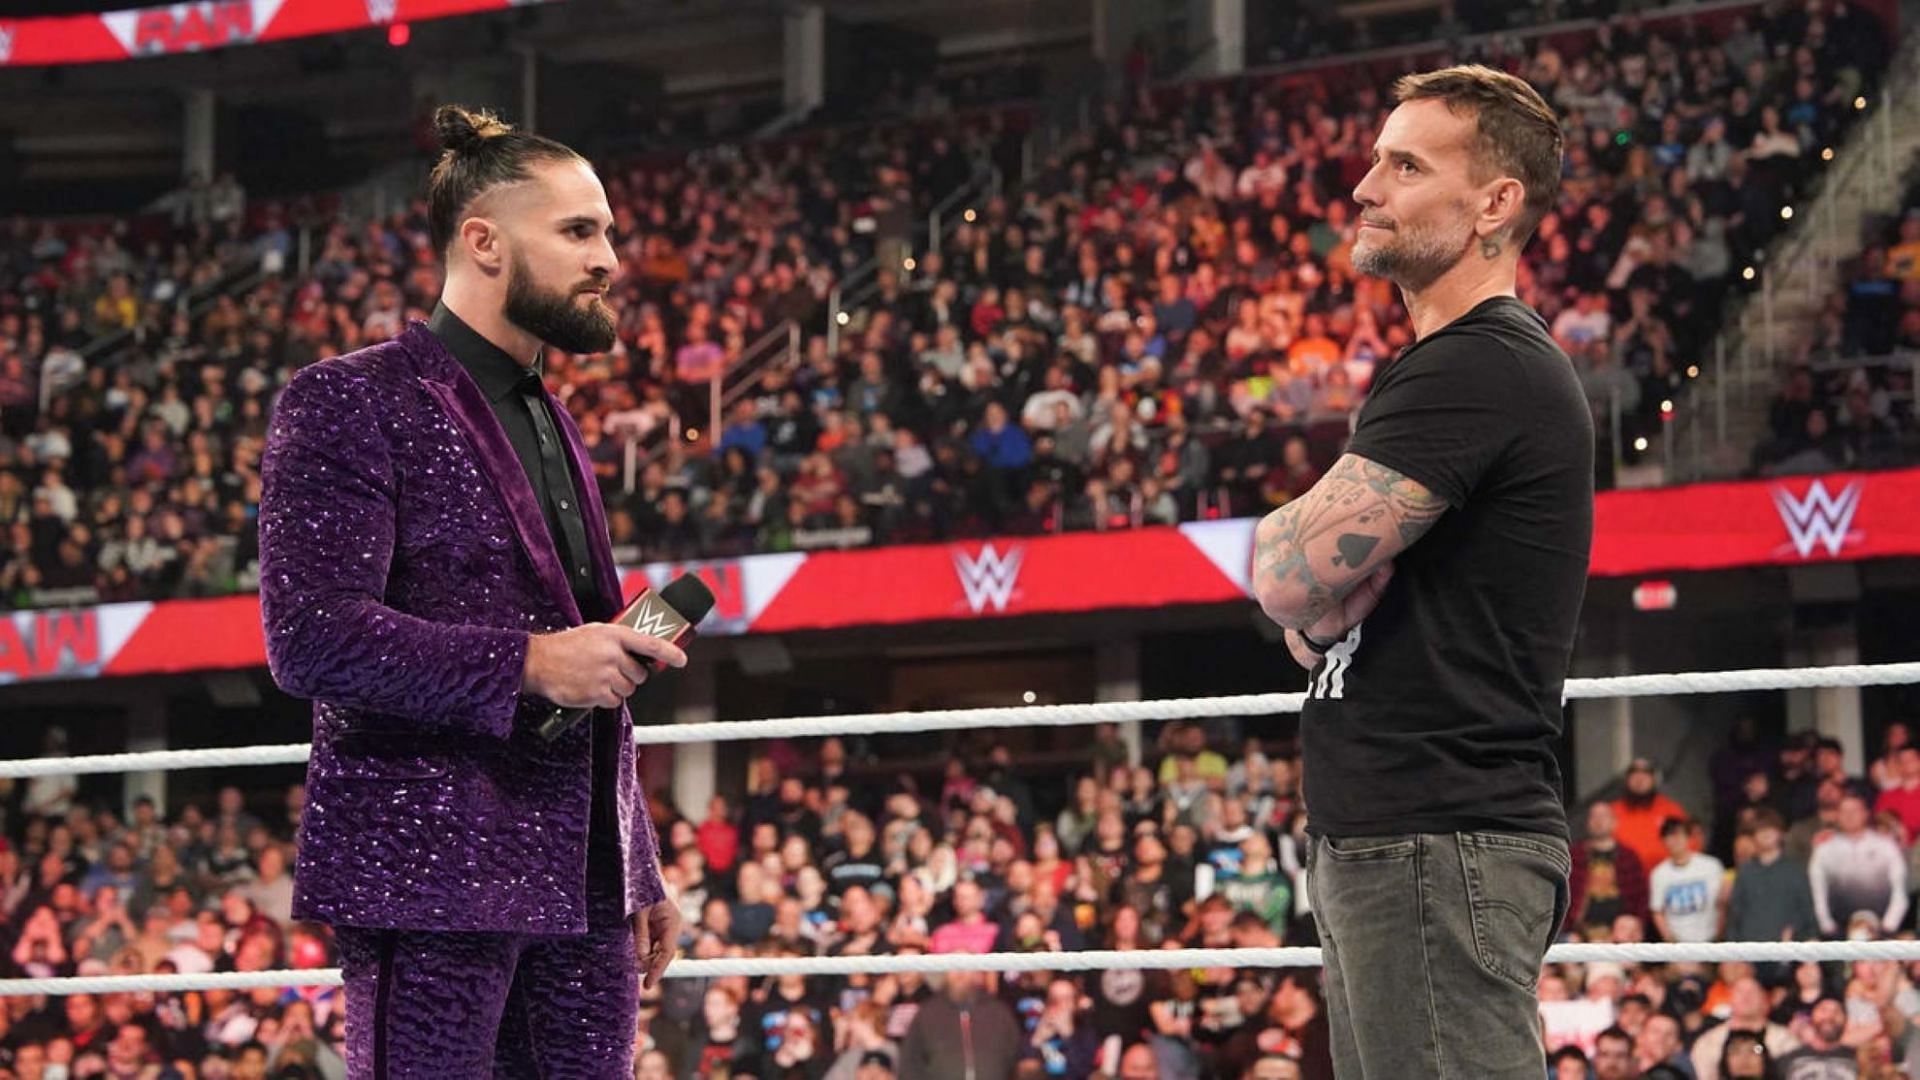 When will CM Punk and Seth Rollins face each other again?